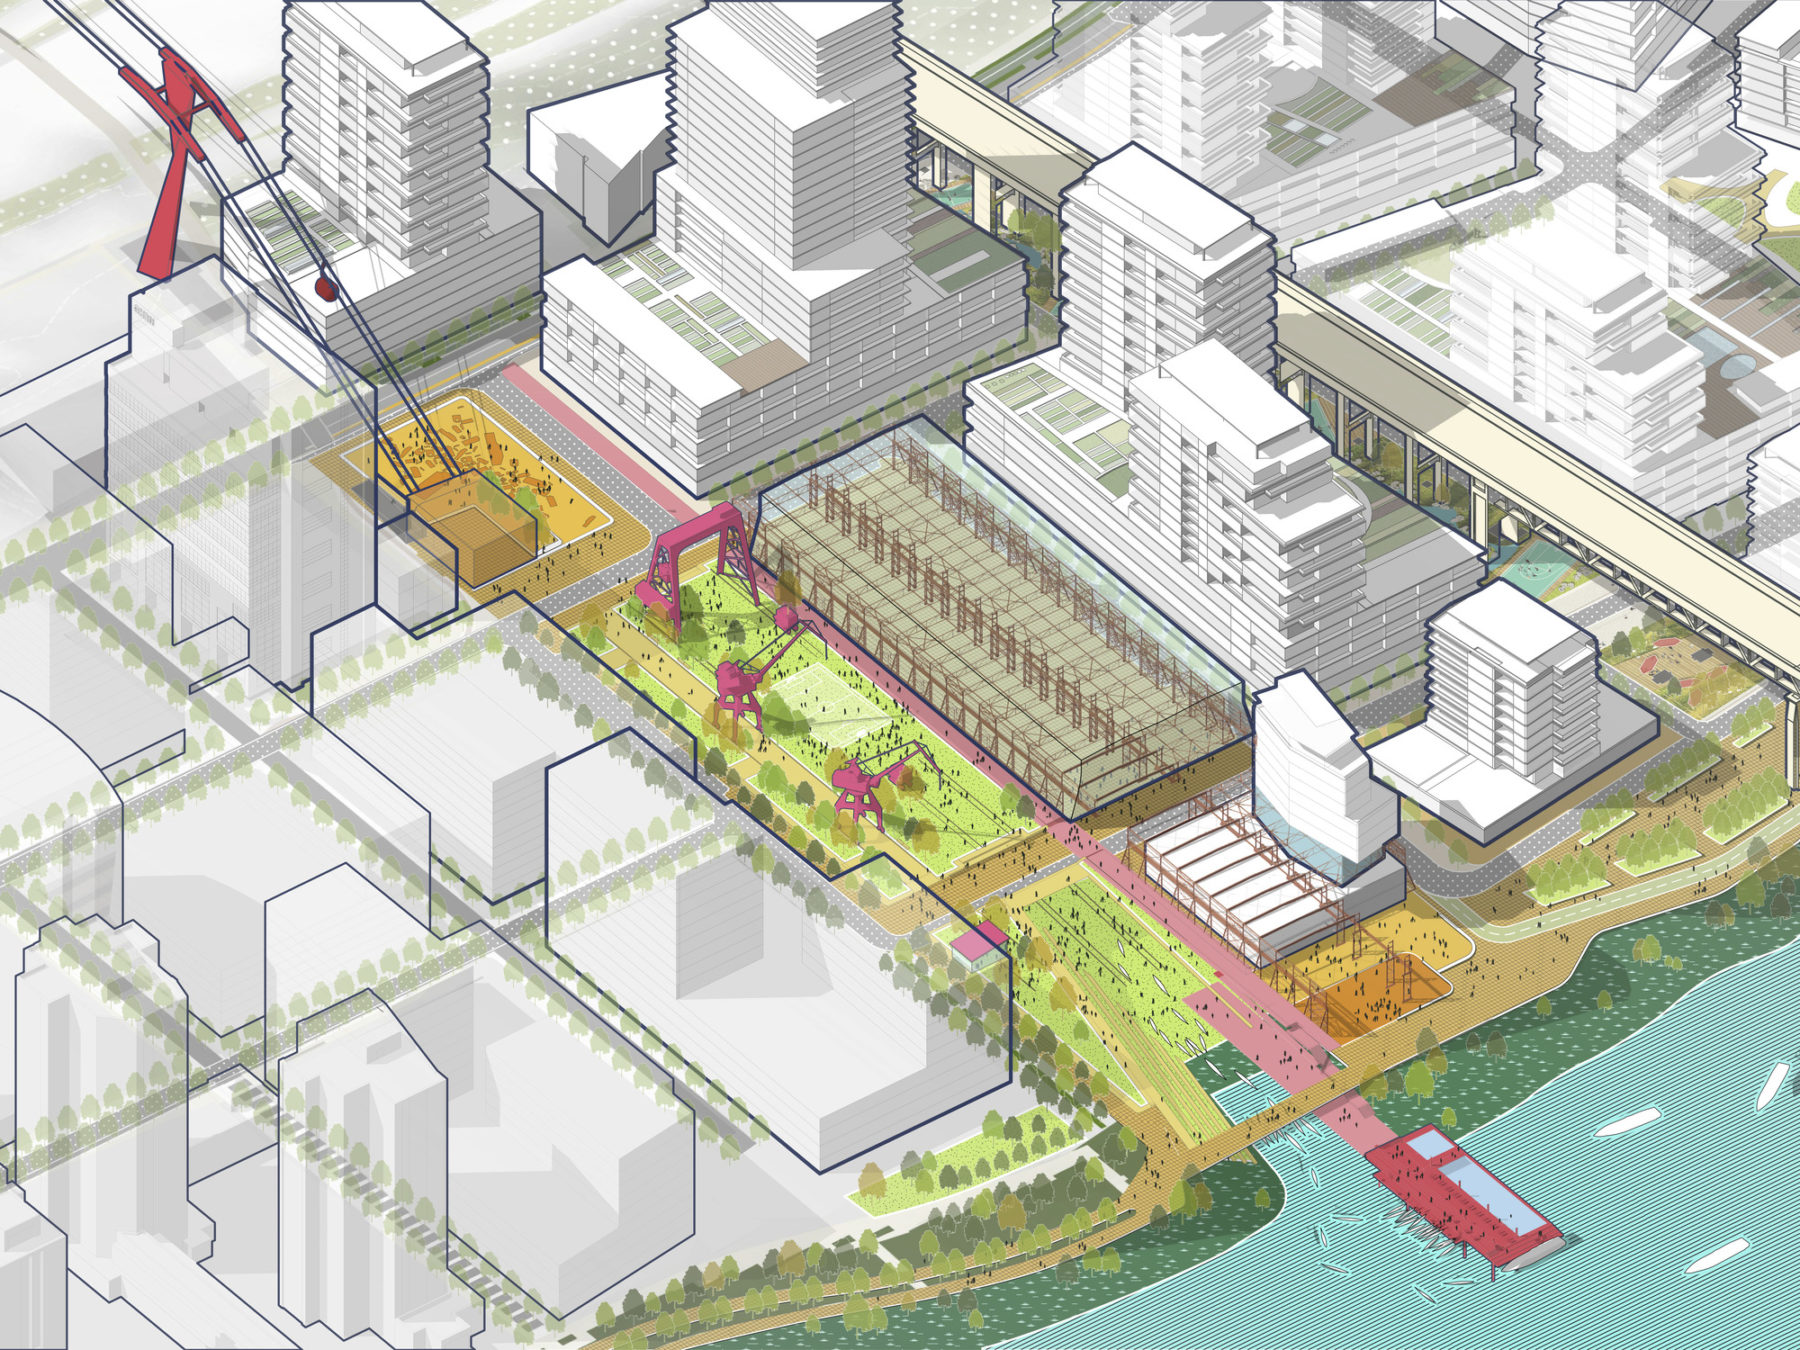 Diagram of open space incorporated into the new Zidell Yards plan